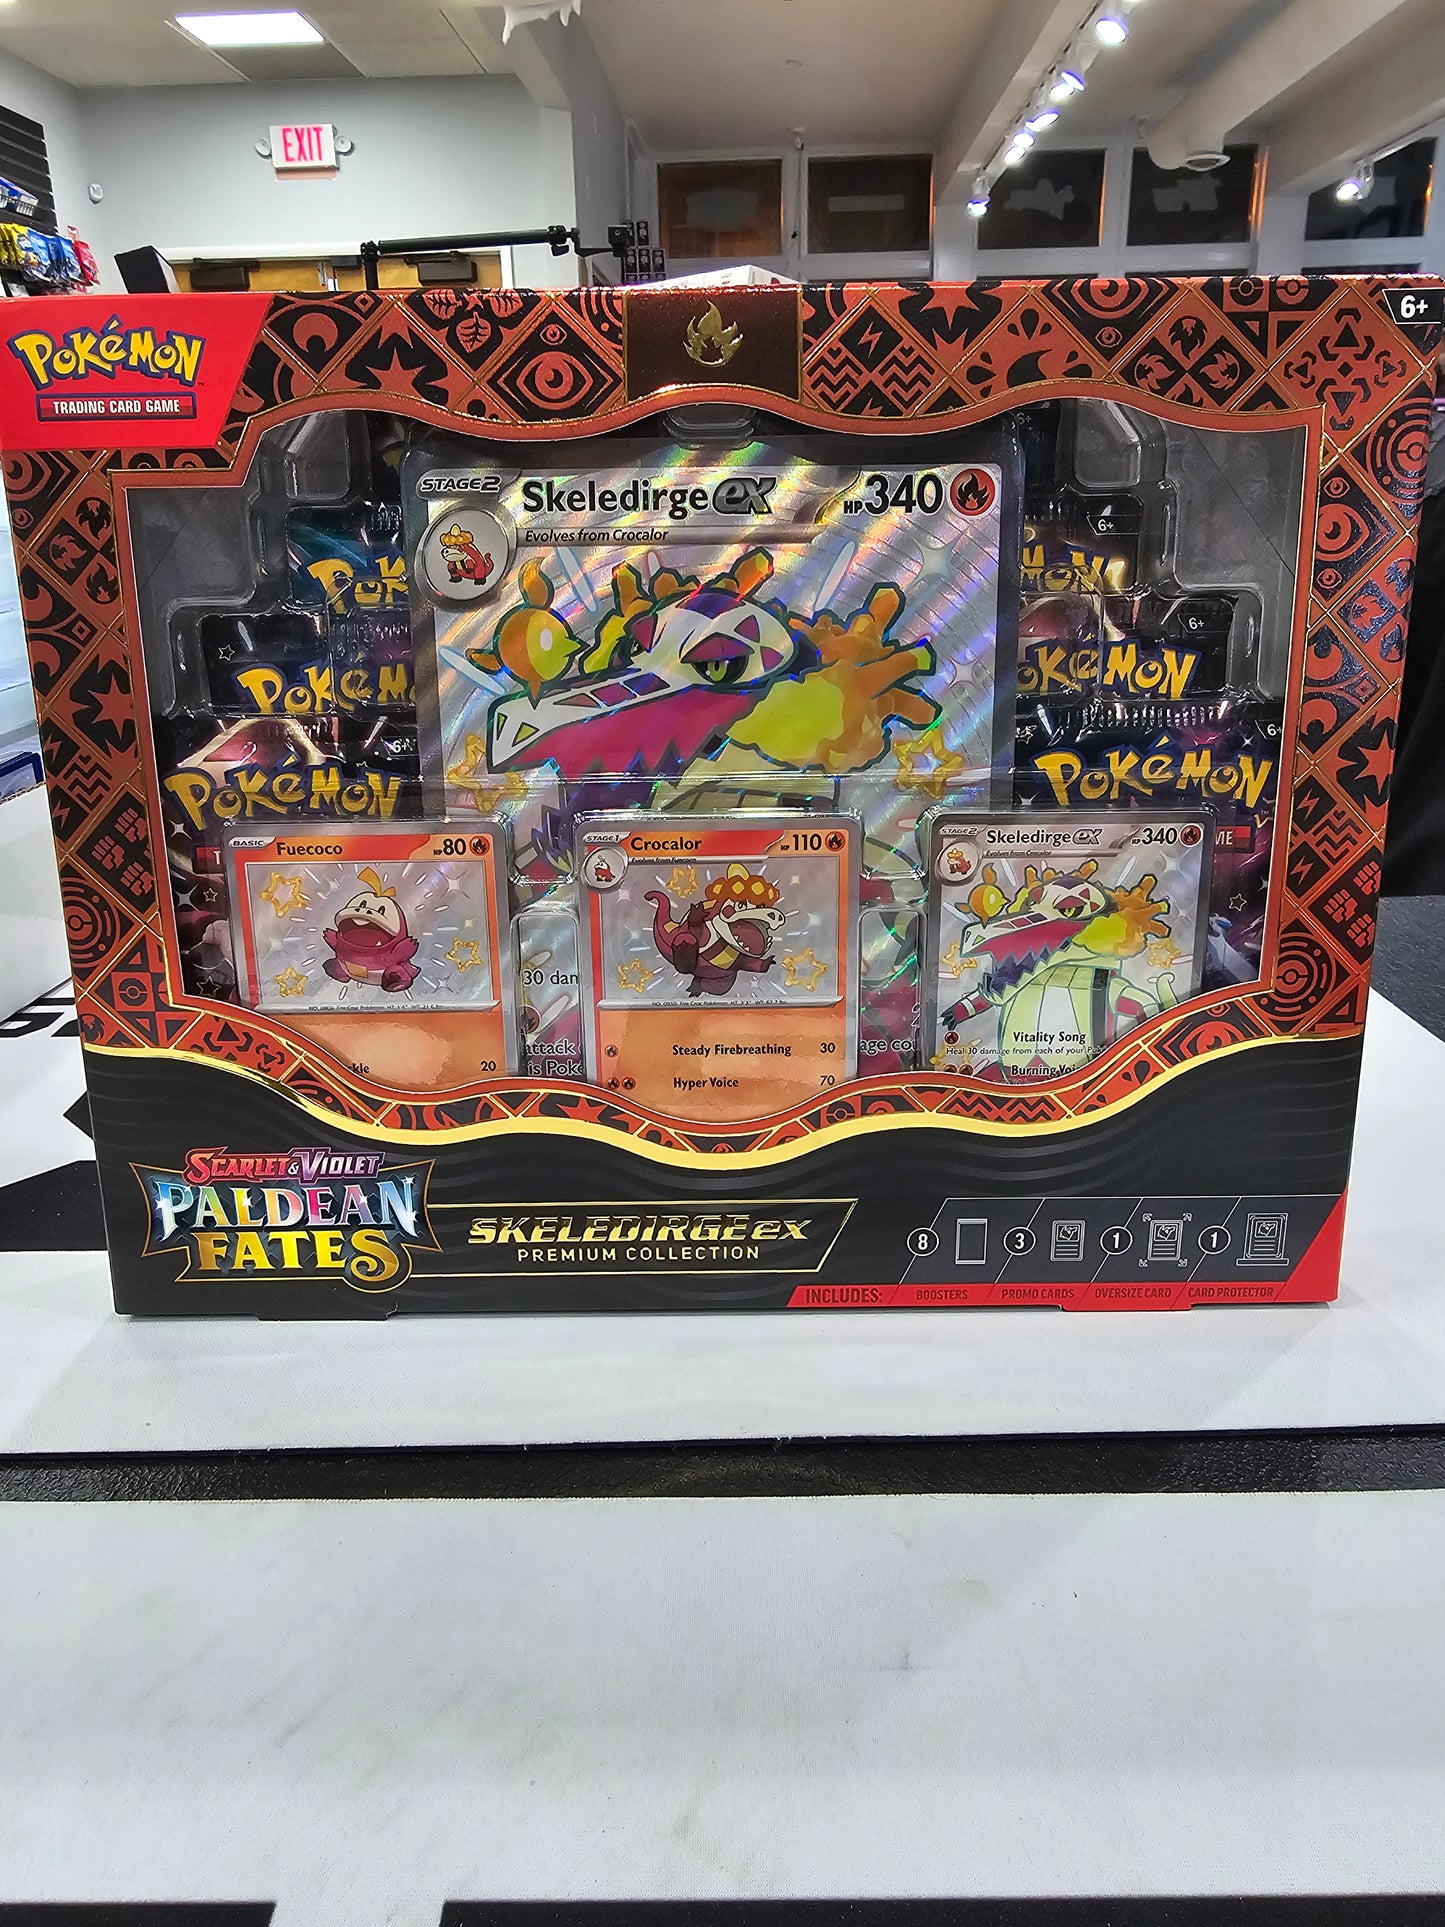 Pokemon - Scarlet and Violet - Paldean Fates - Premium Collection Box - Style Varies